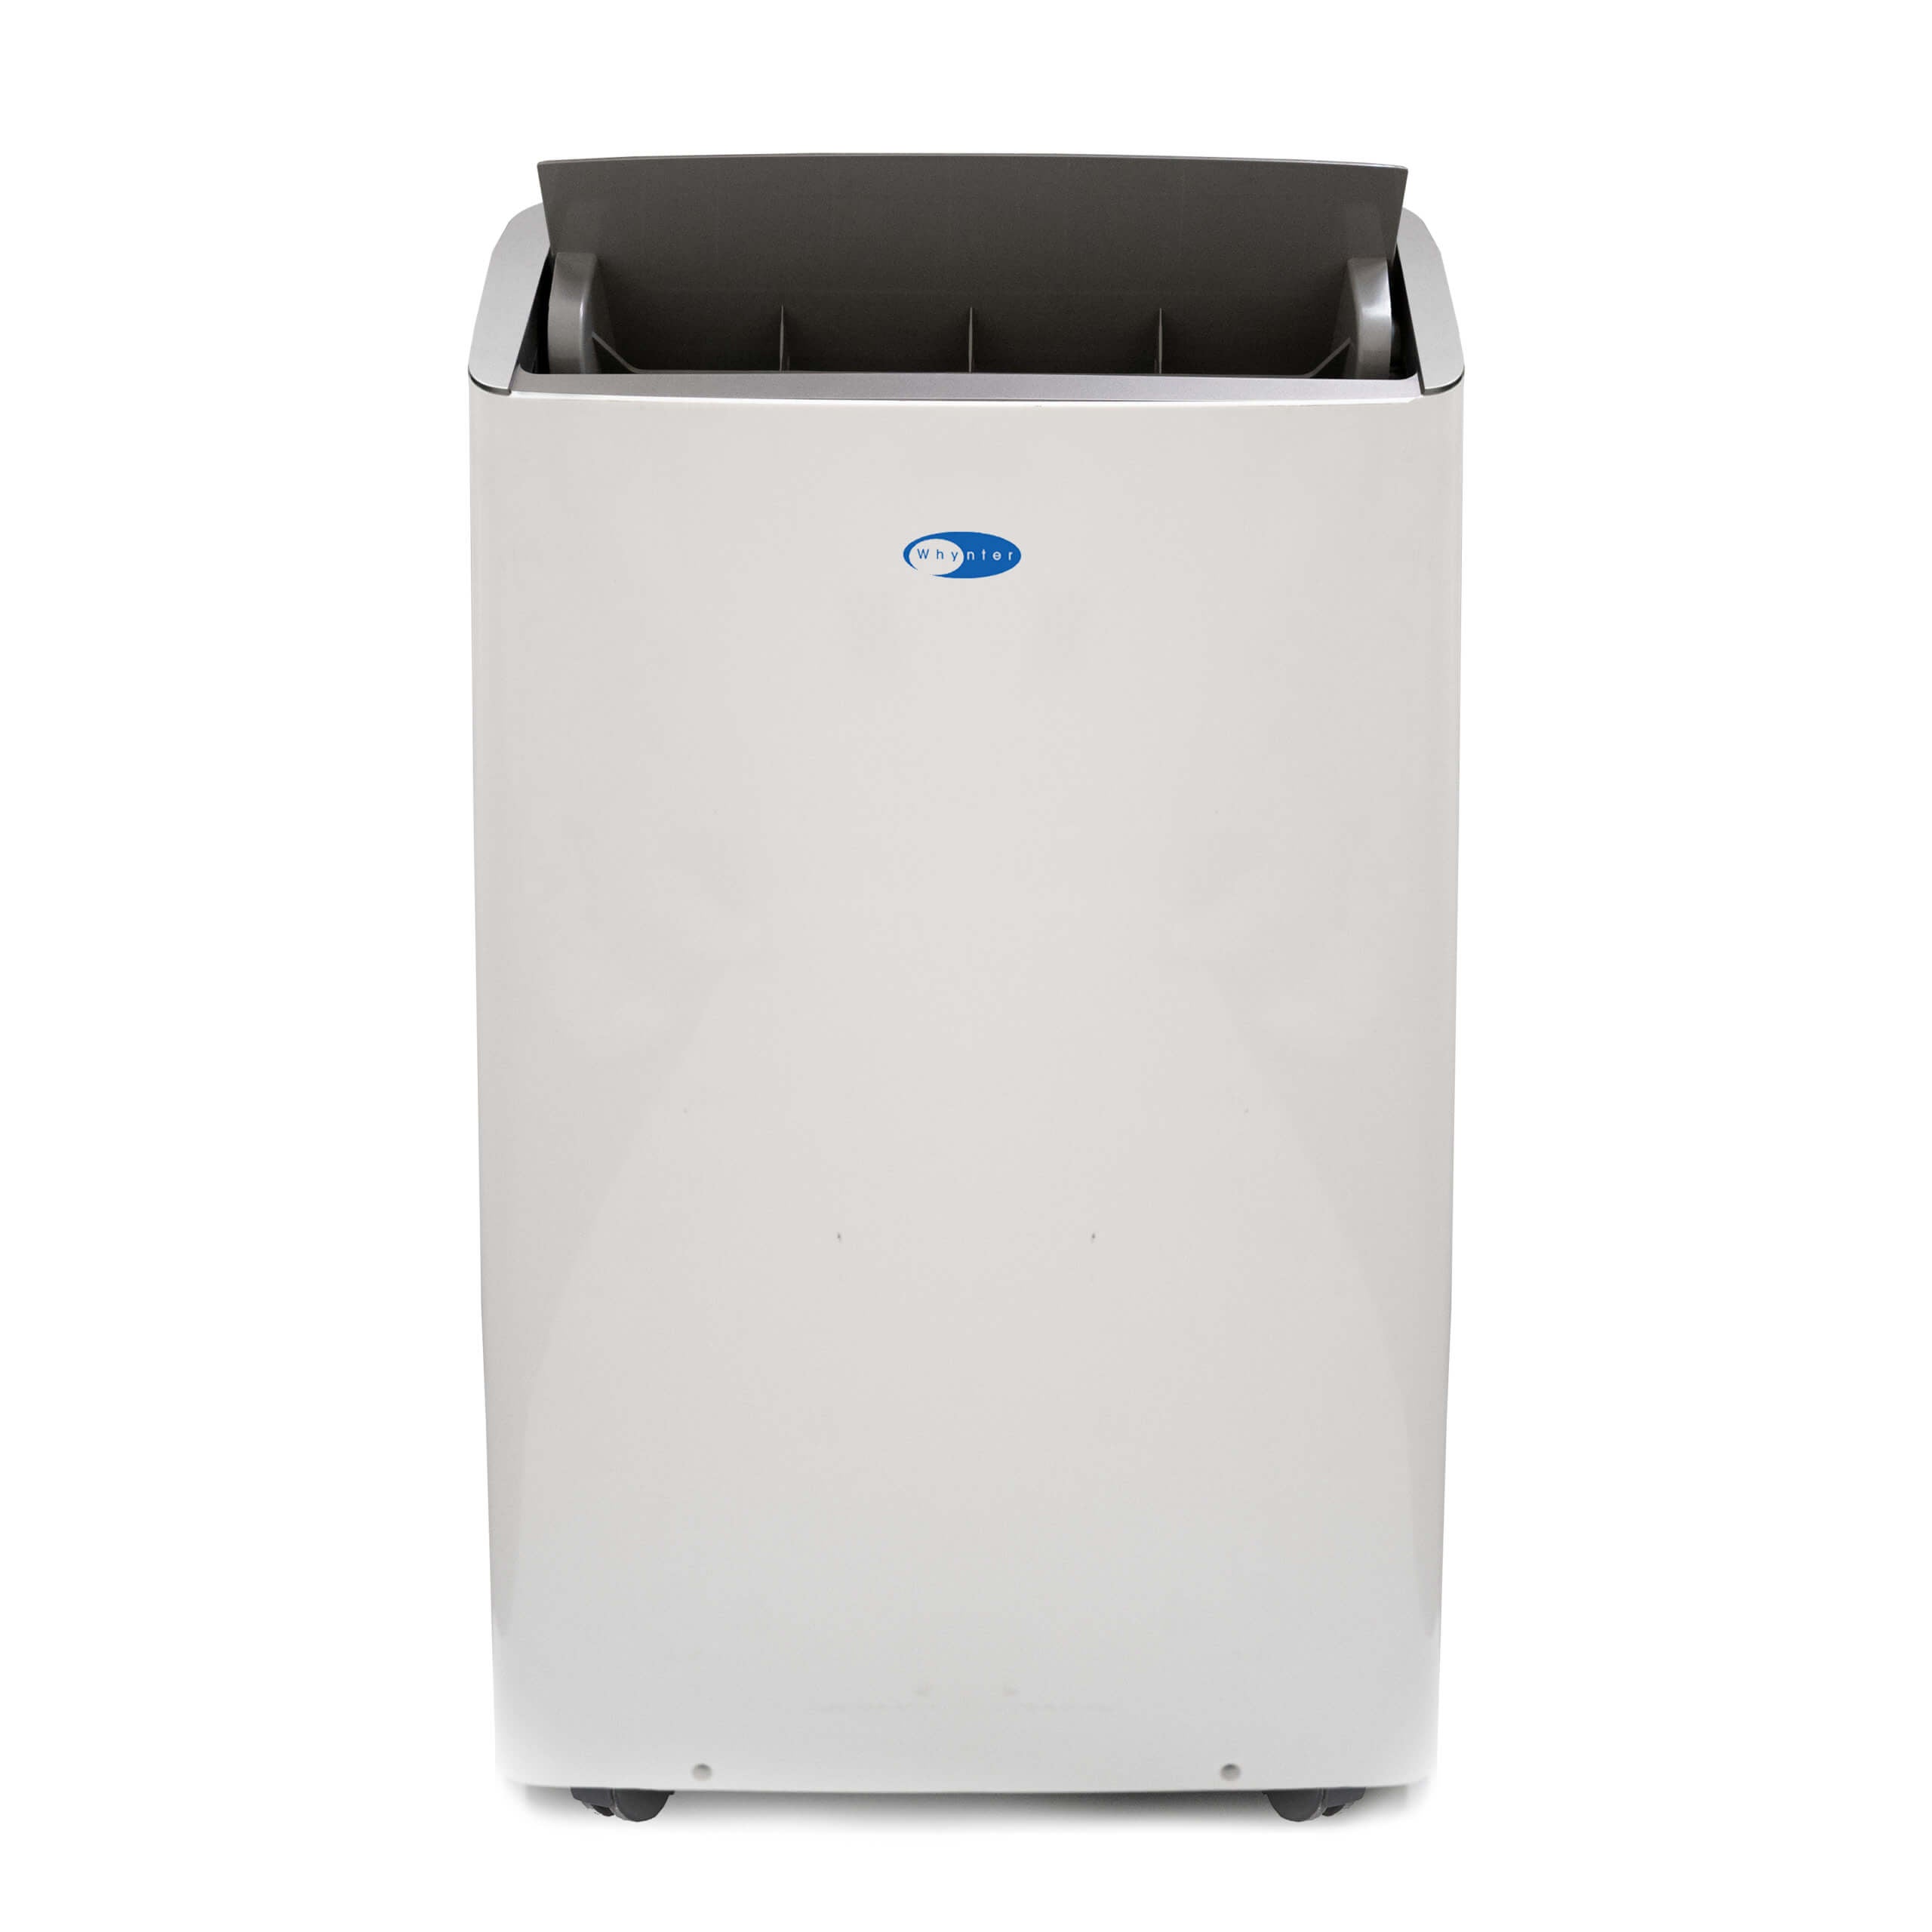 Whynter, Whynter ARC-1030WN 10,000 BTU SACC in White Inverter Dual Hose Portable Air Conditioner with Smart Wi-Fi New